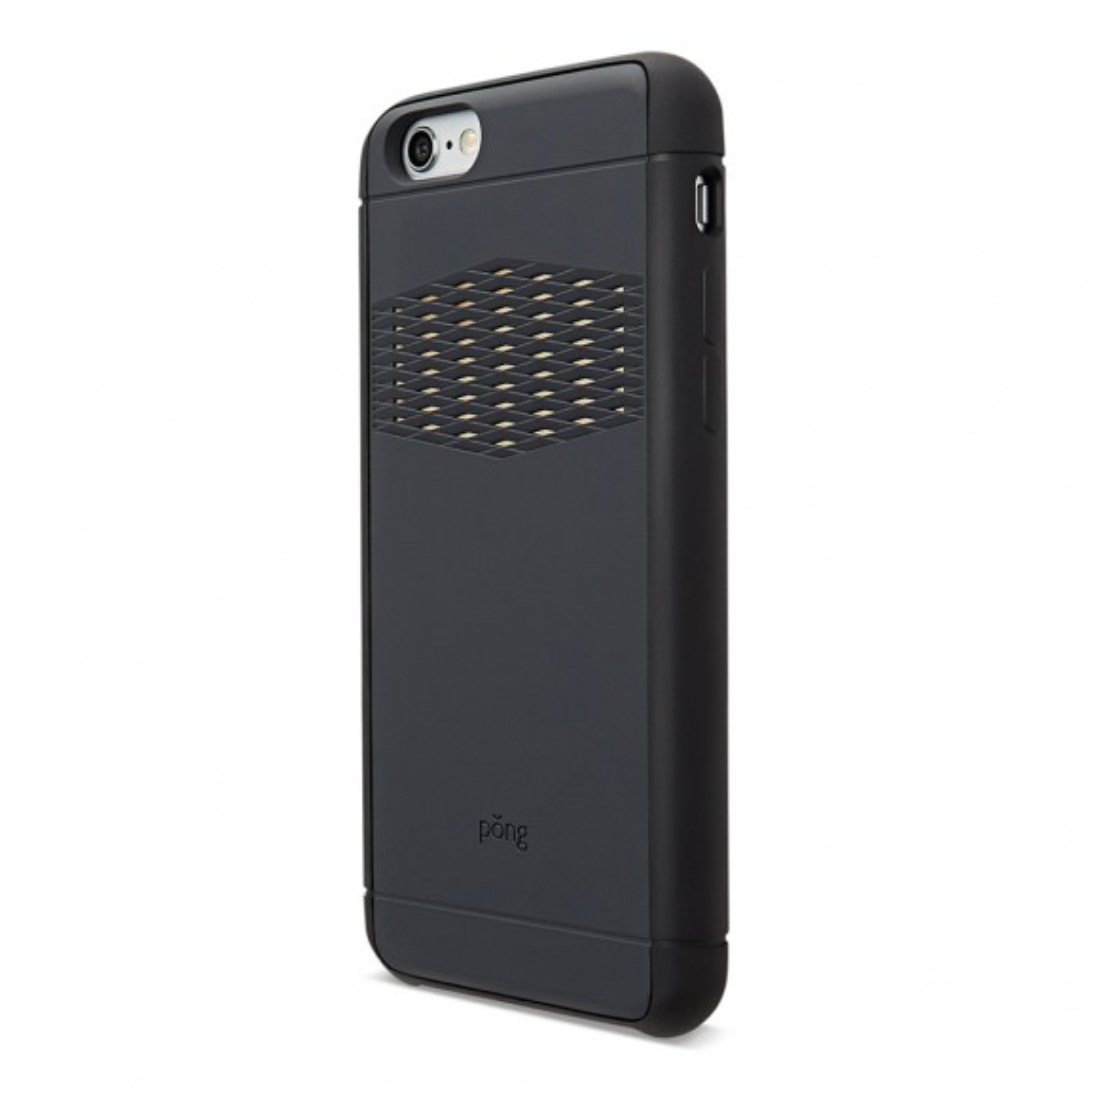 pong iphone case